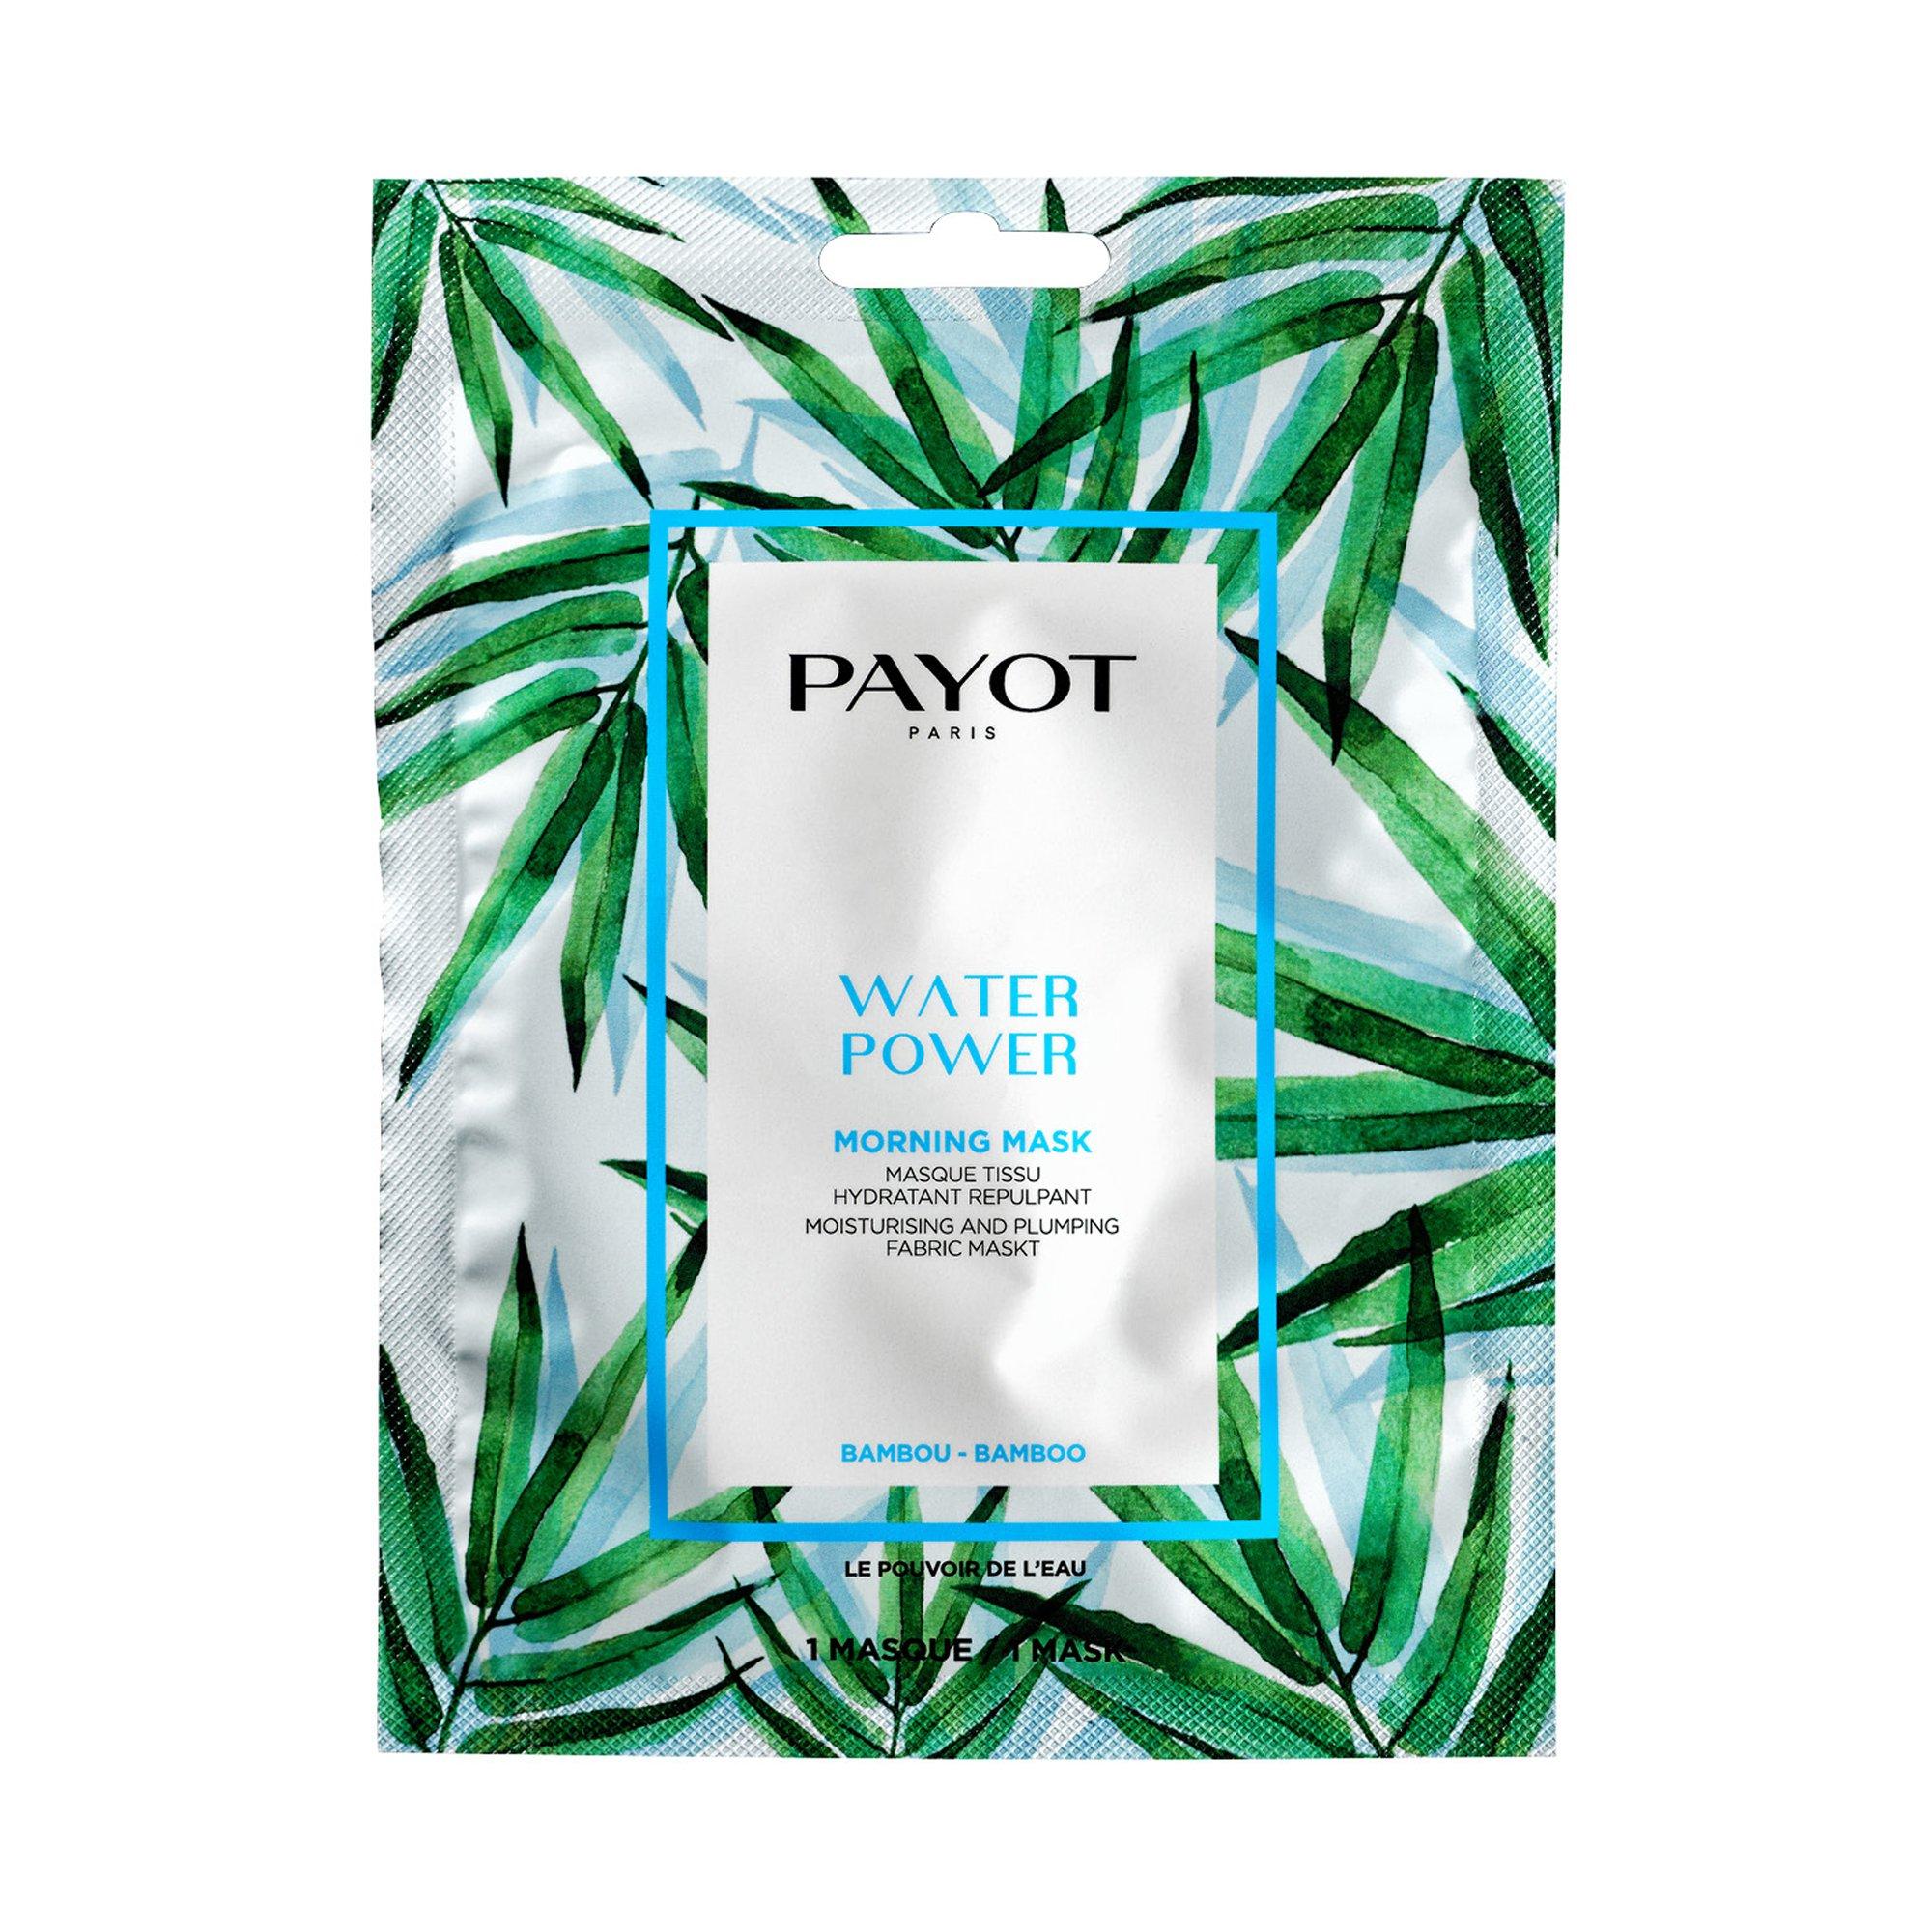 Image of PAYOT Morning Mask Water power Morning Mask Water Power